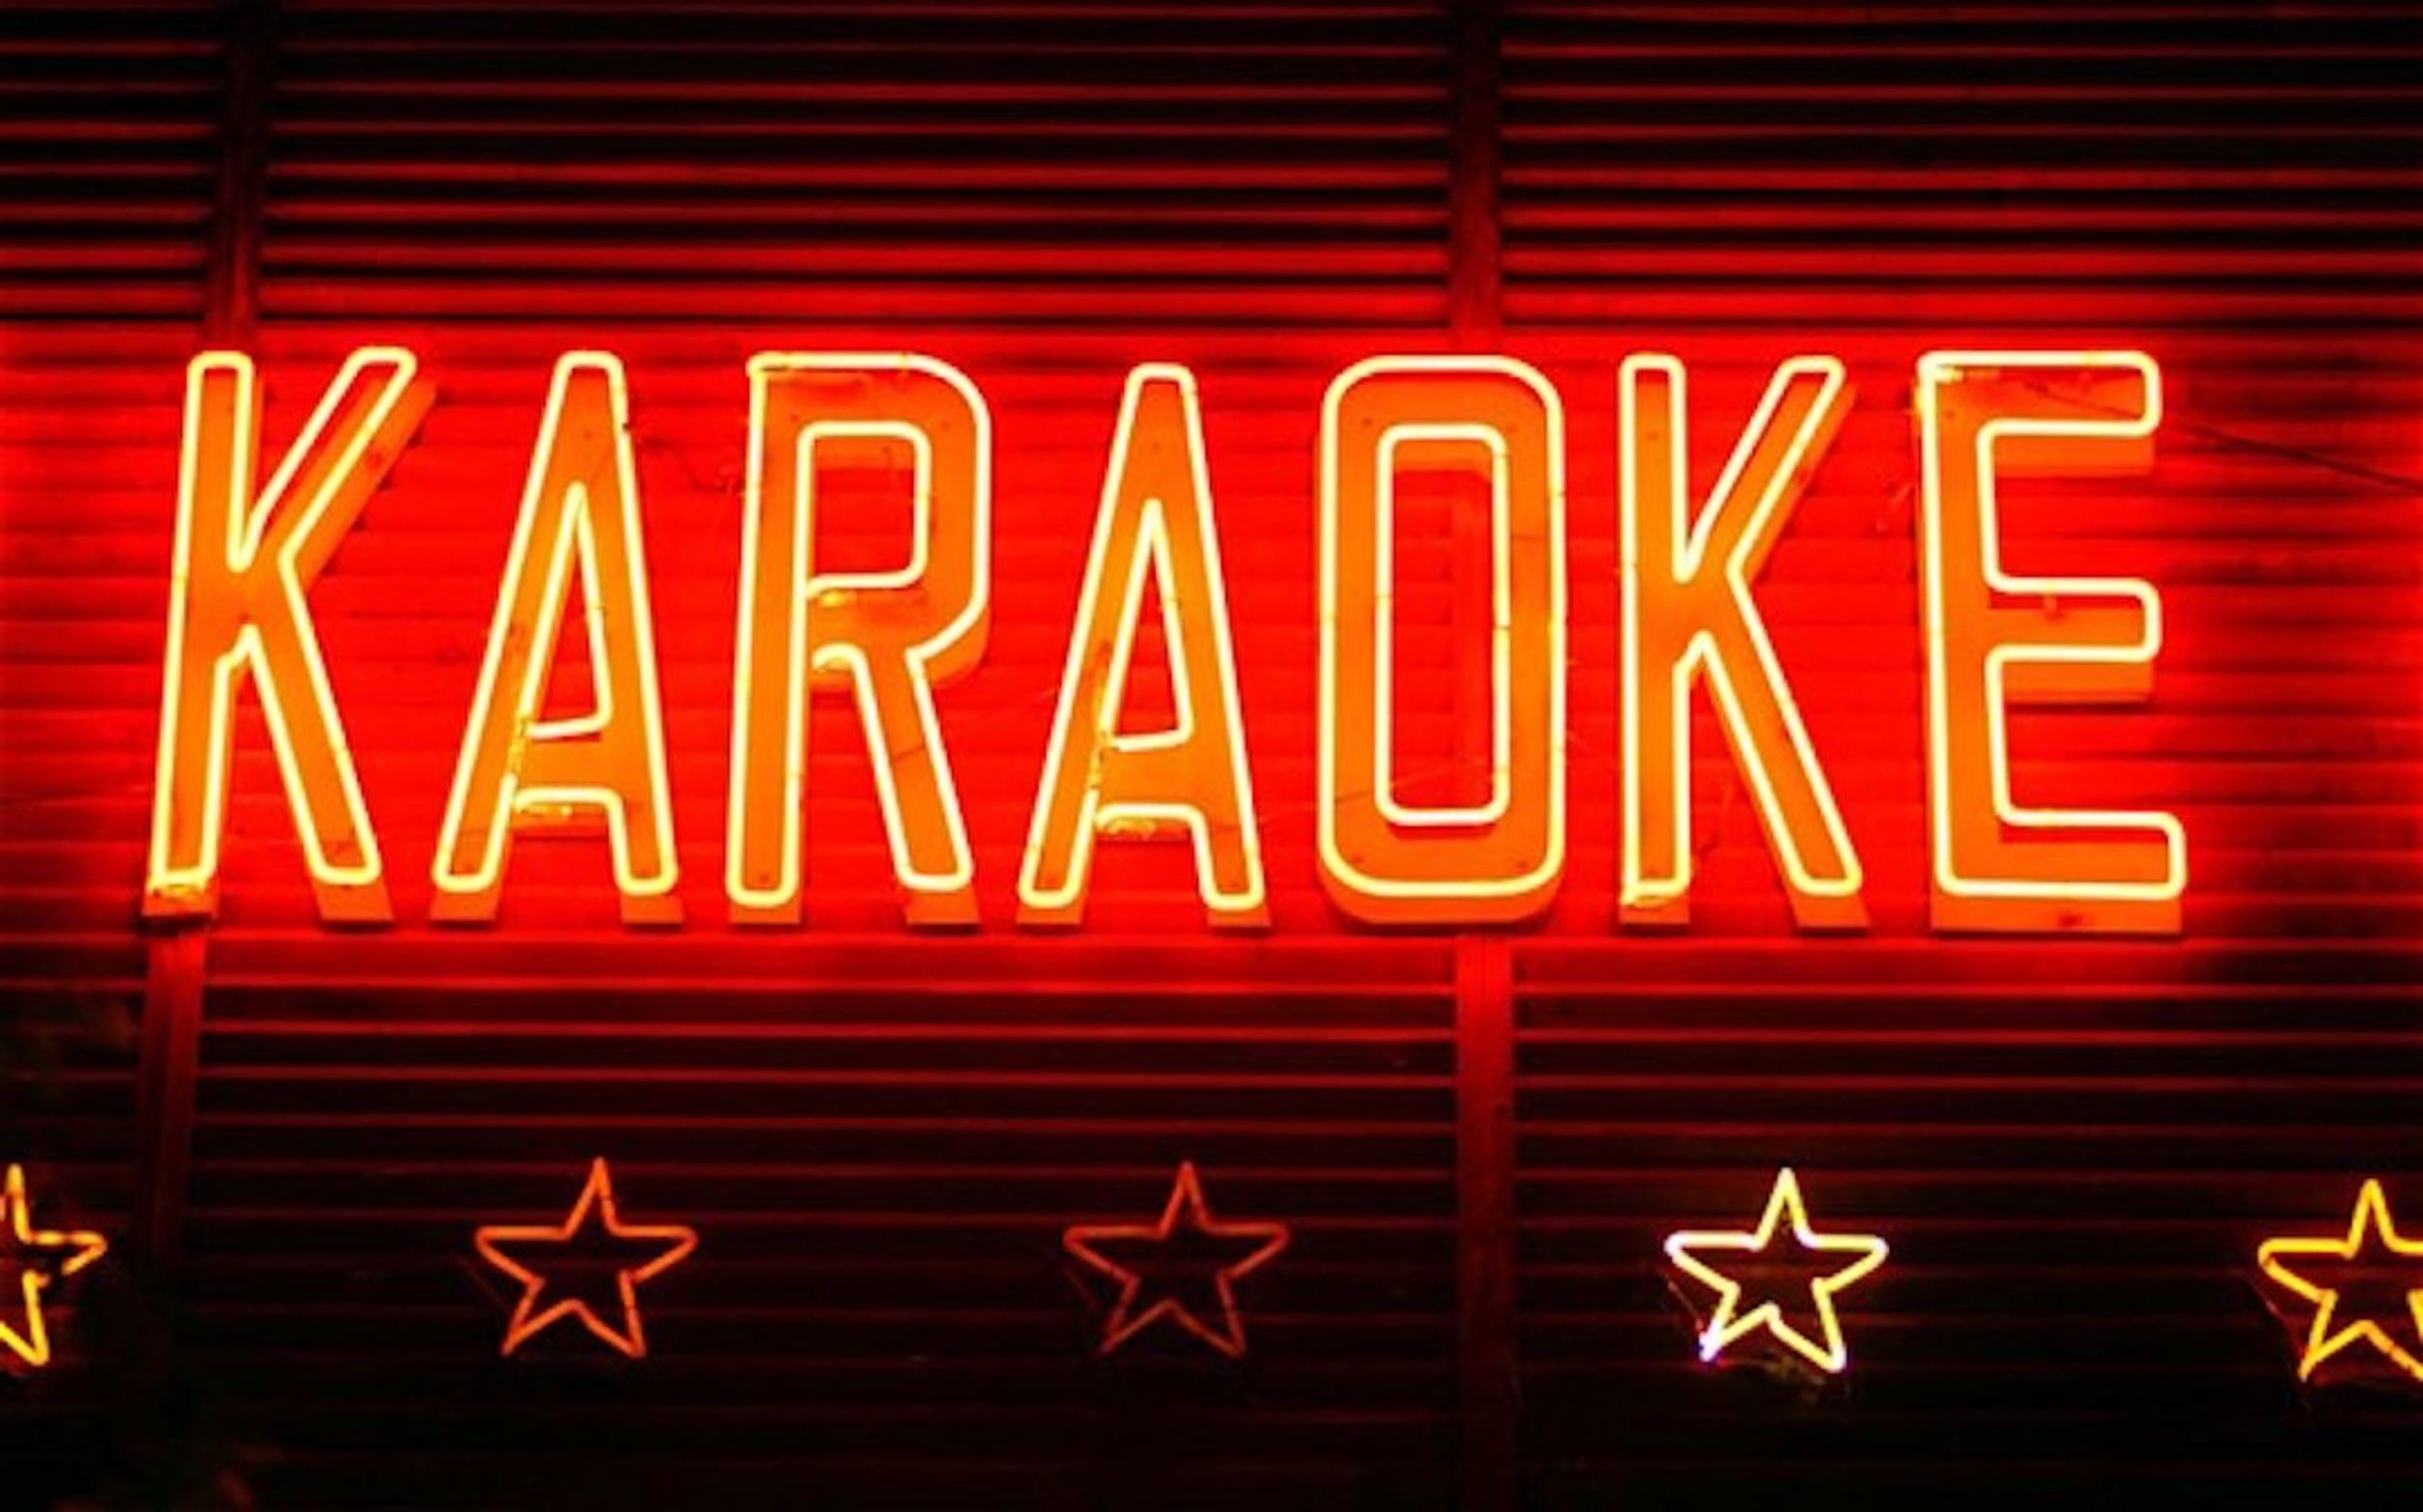 What Your Go-to Karaoke Song Says About You